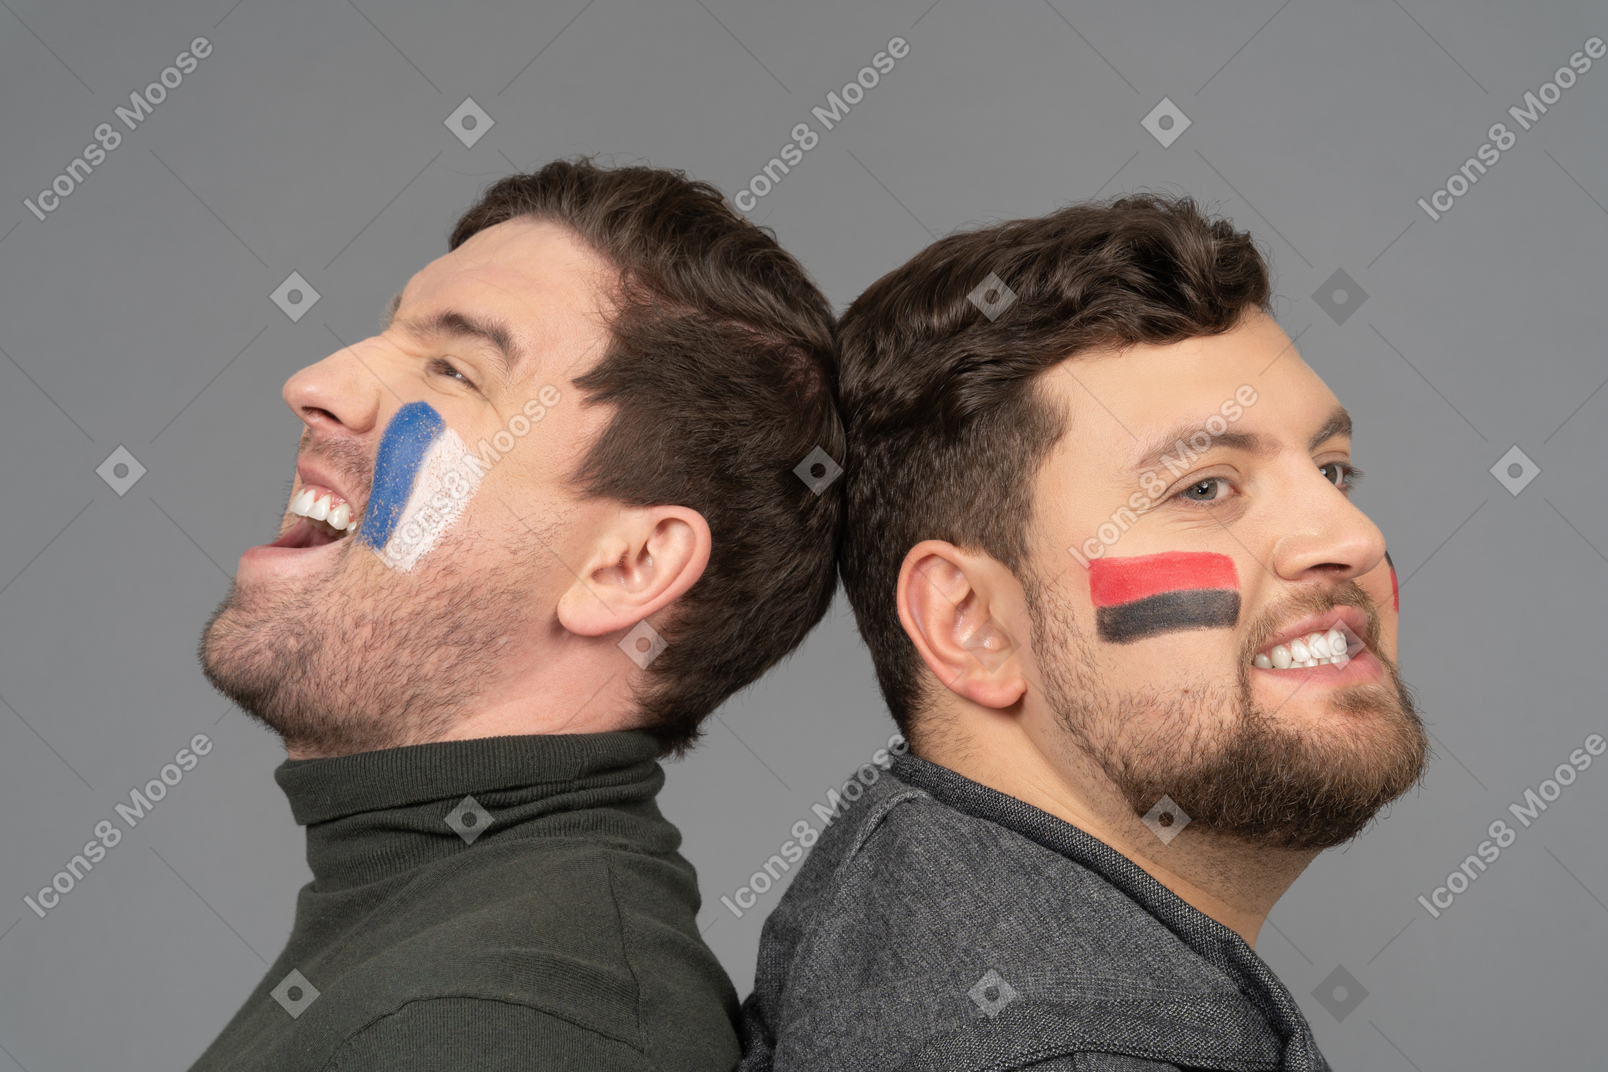 Side view of two emotional male football fans